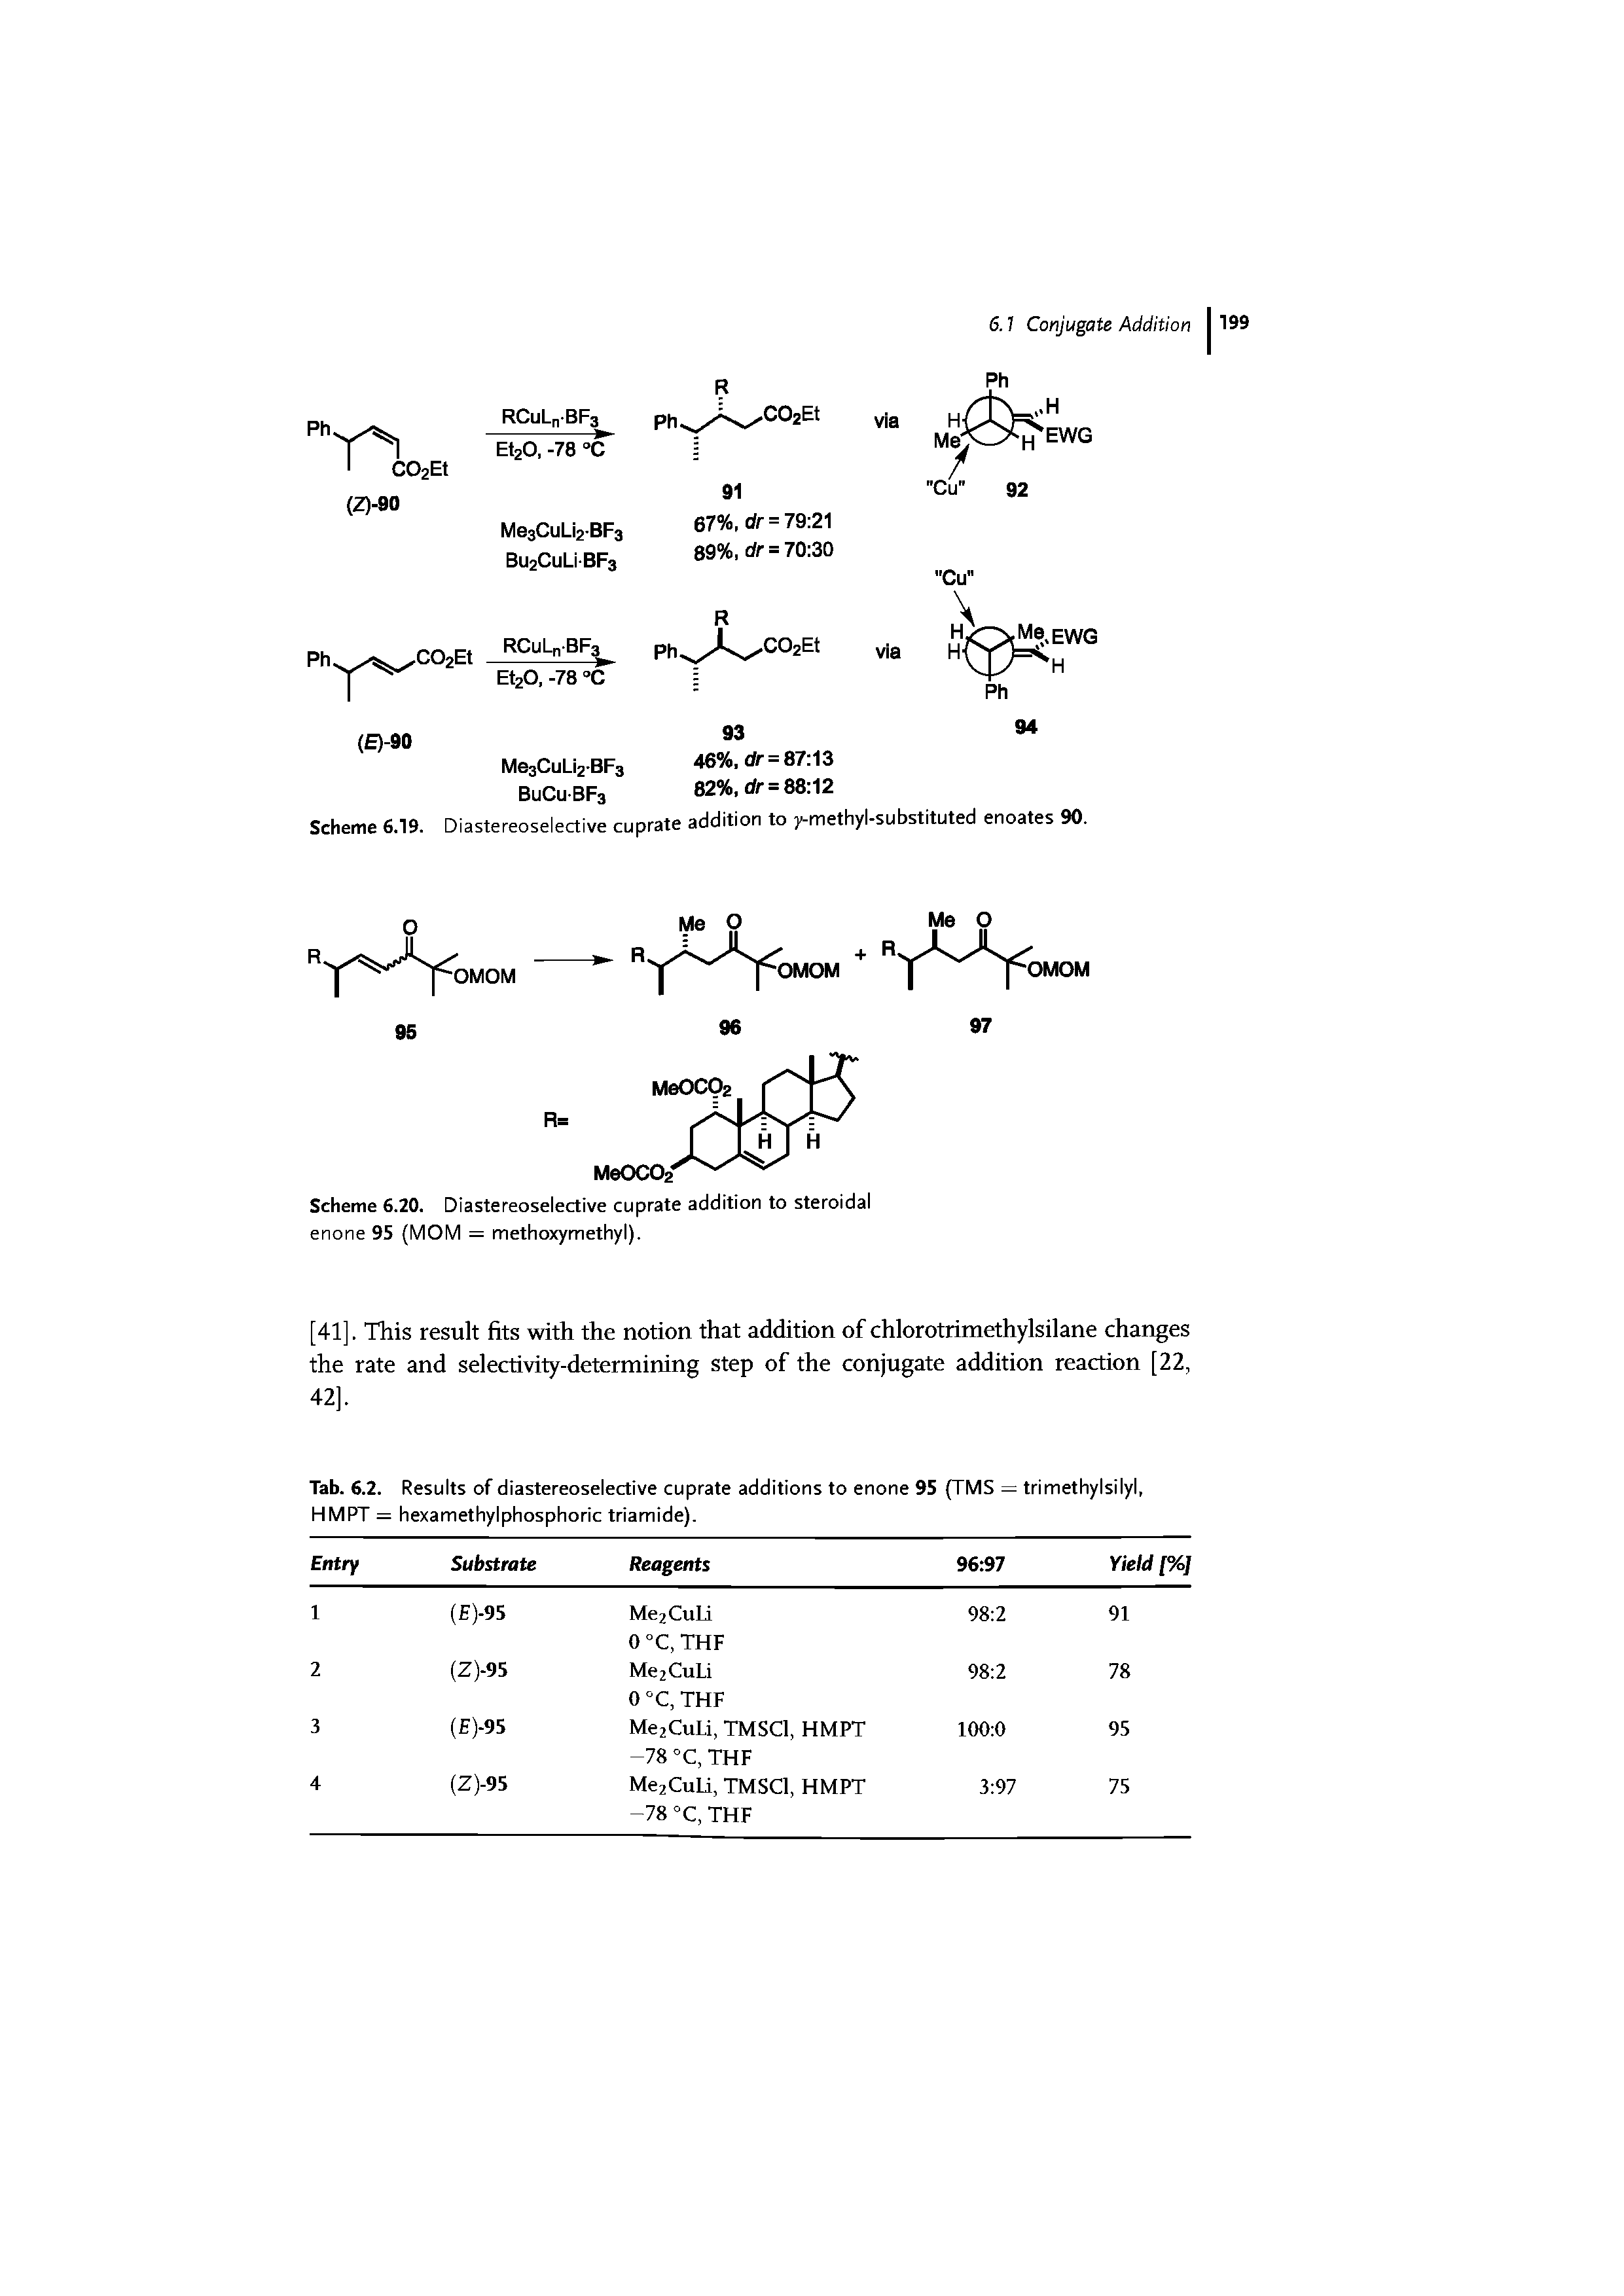 Tab. 6.2. HMPT = Results of diastereoselective cuprate additions to enone hexamethylphosphoric triamide). 95 (TMS = trimethylsilyl,...